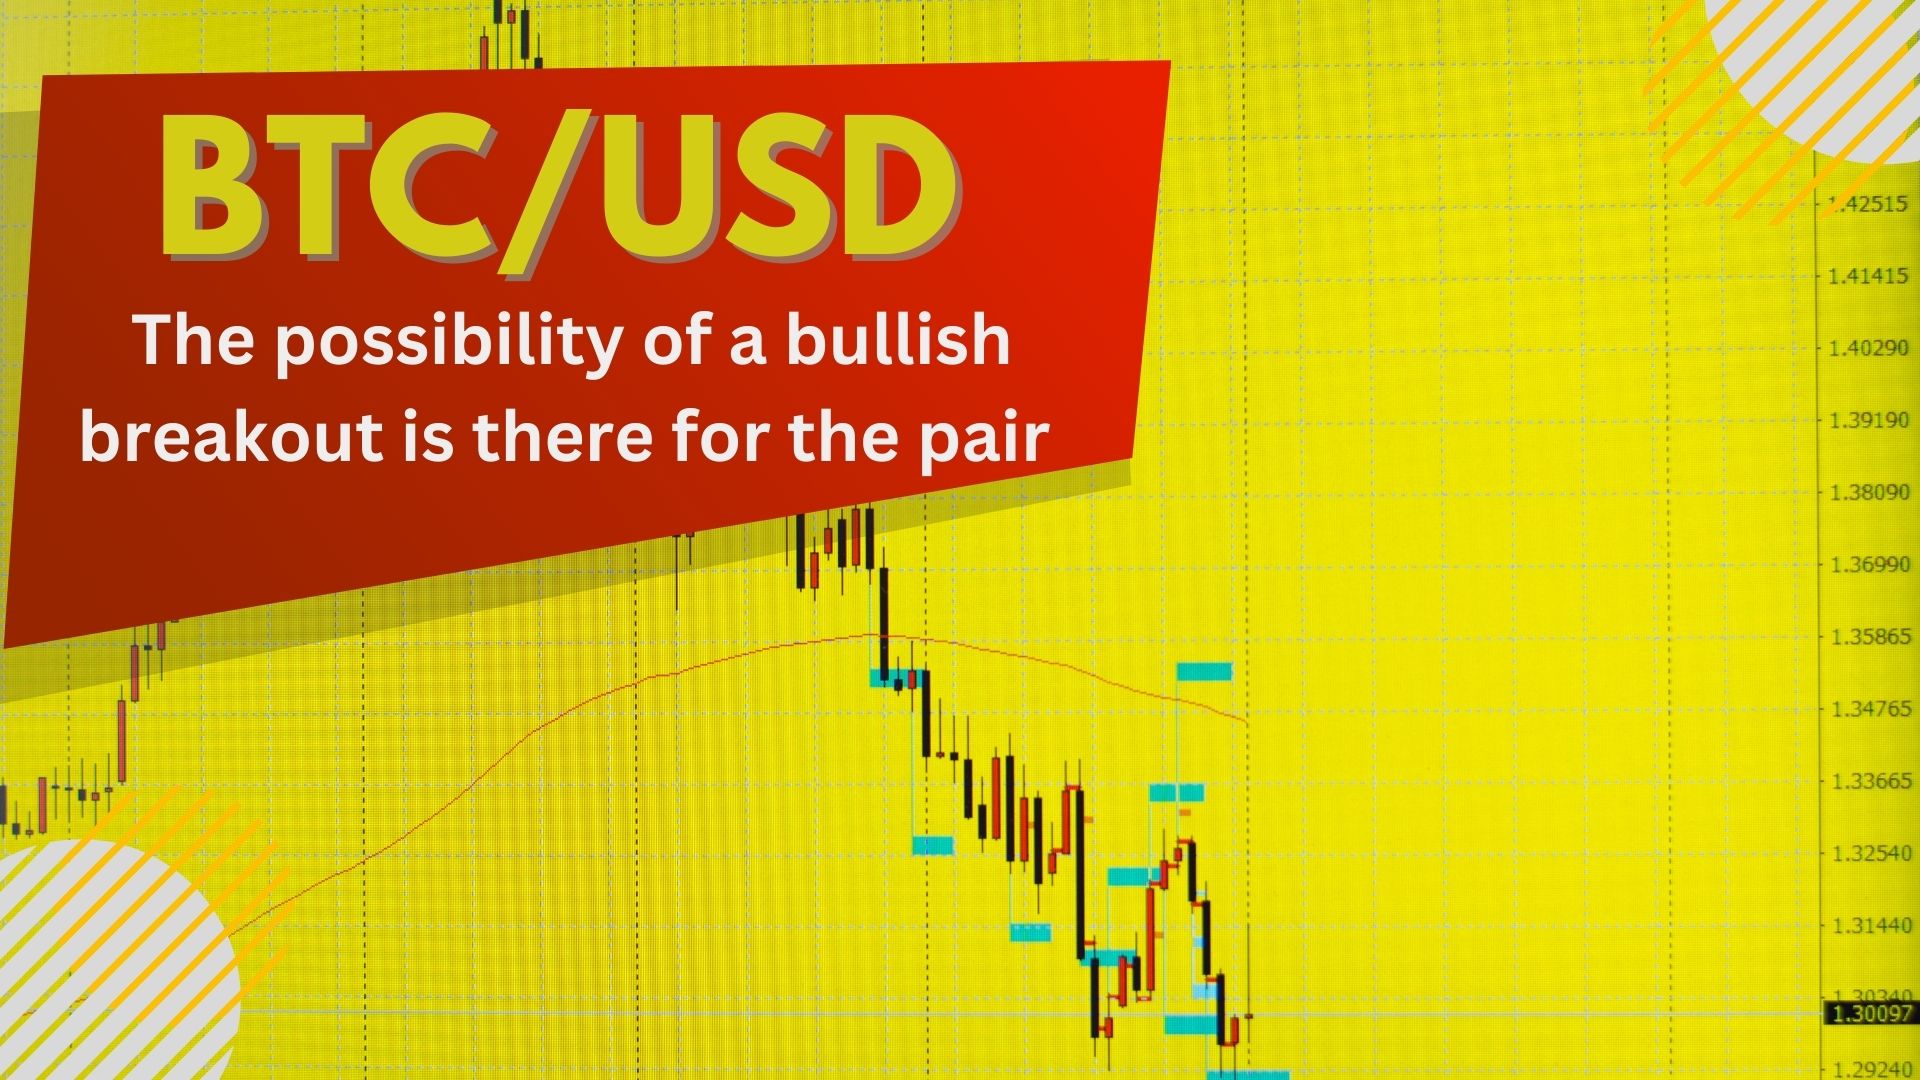 The possibility of a bullish breakout is there for the pair